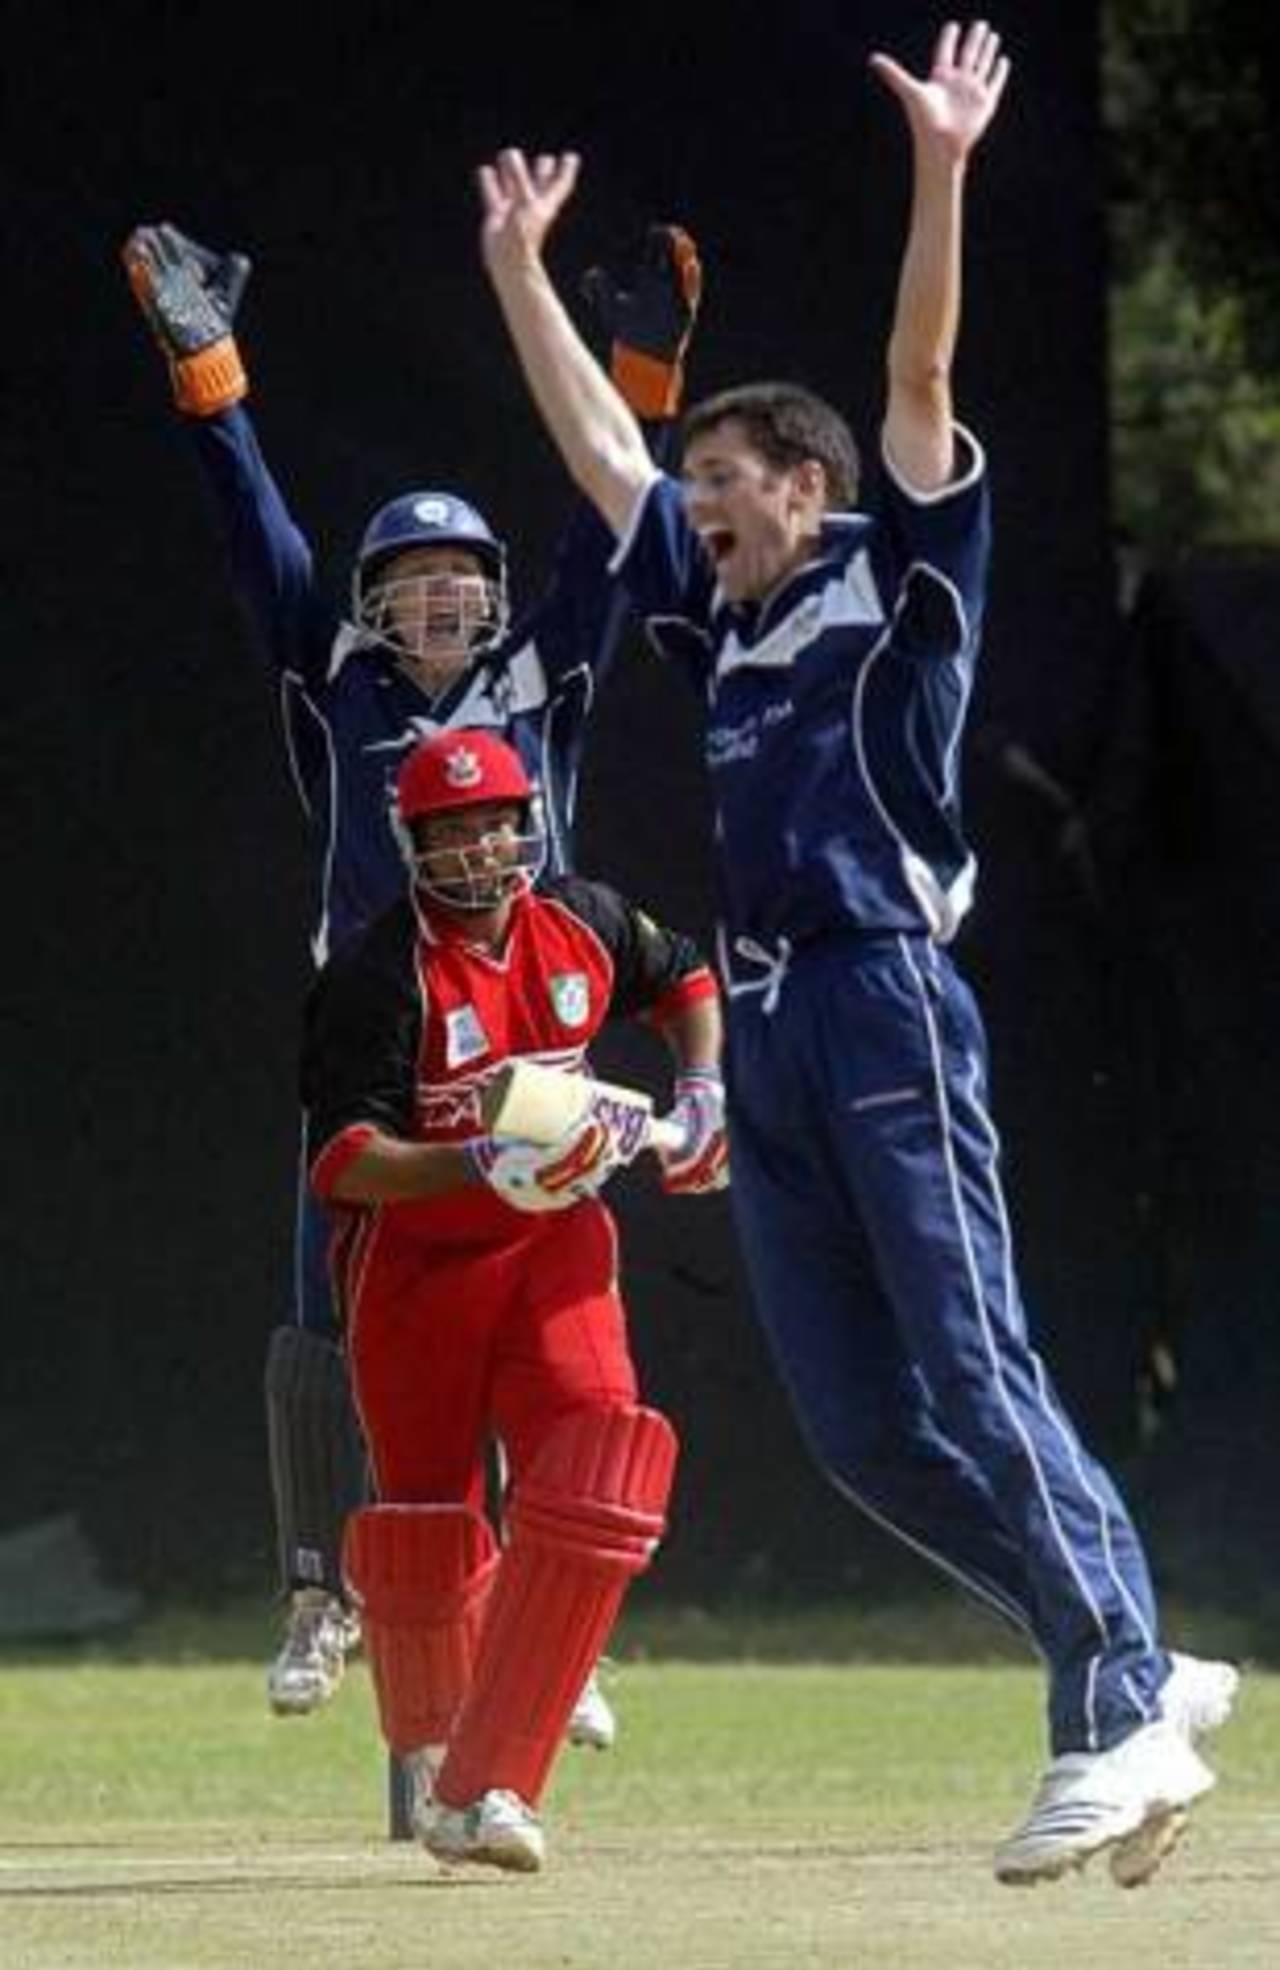 Wright celebrates a wicket in 2007. "We have experienced several highs and lows over this time, but I am glad to have been involved during a period where the Scotland team took significant strides forward."&nbsp;&nbsp;&bull;&nbsp;&nbsp;AFP